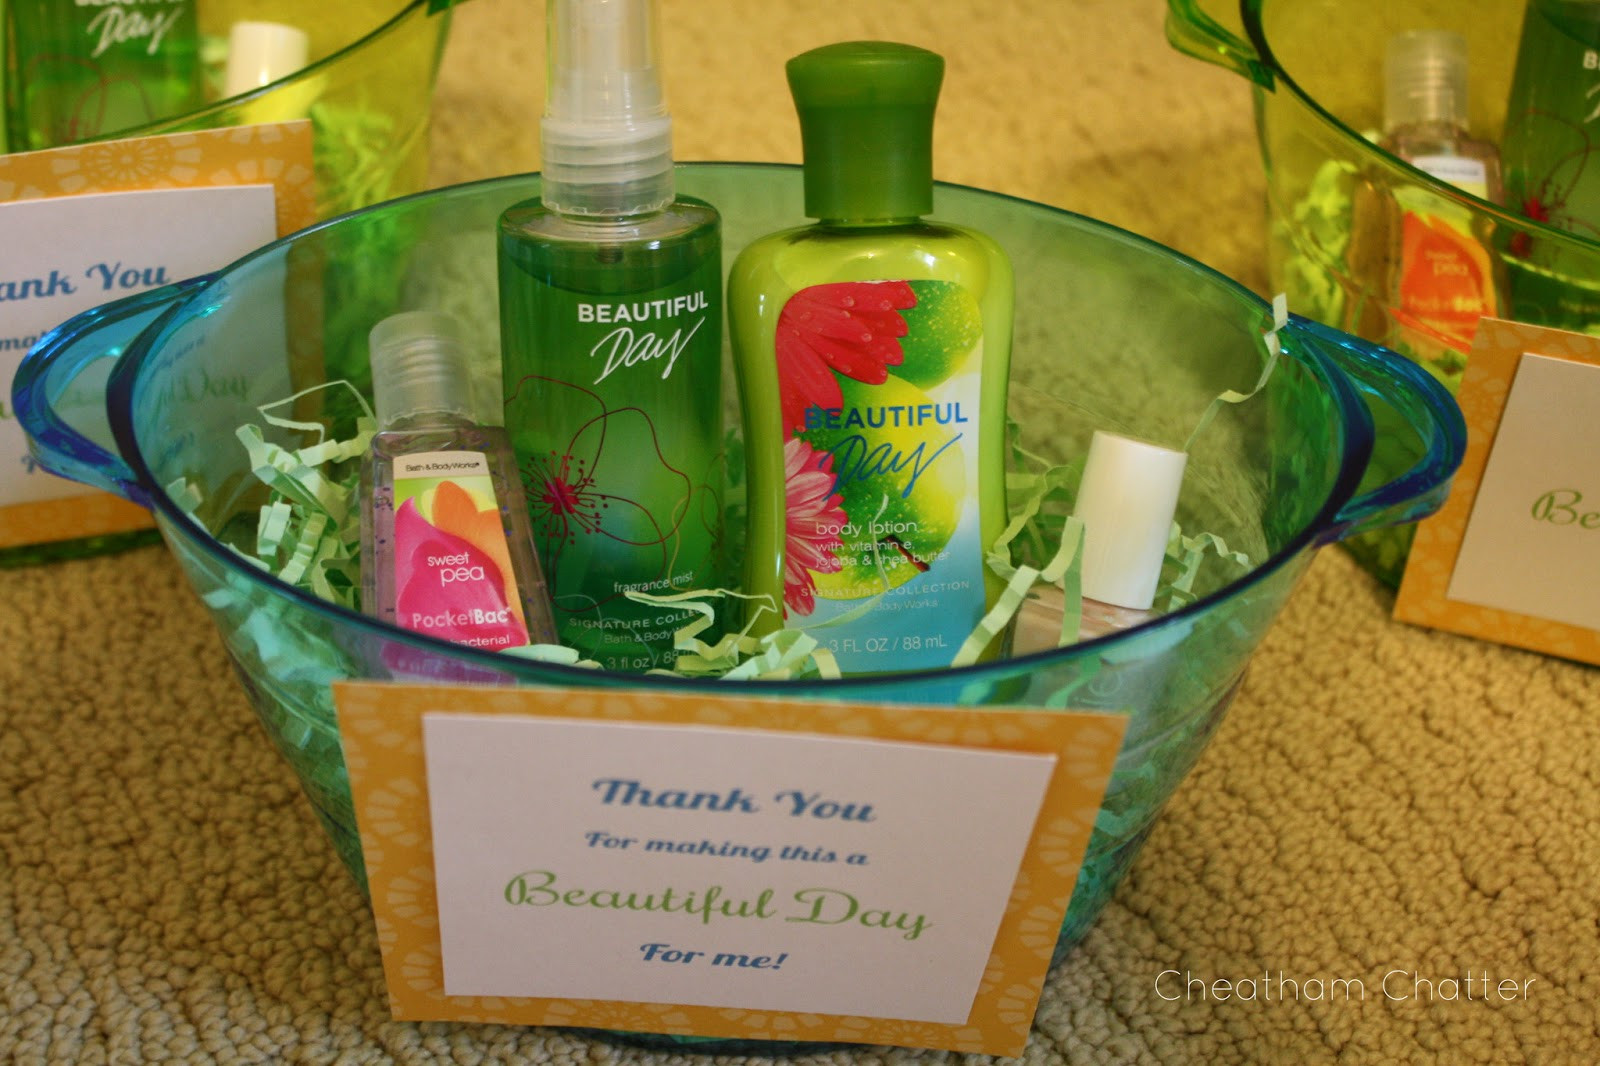 Thank You Gift Ideas For Baby Shower Host
 Cheatham Chatter Baby Shower Favors & Hostess Gifts